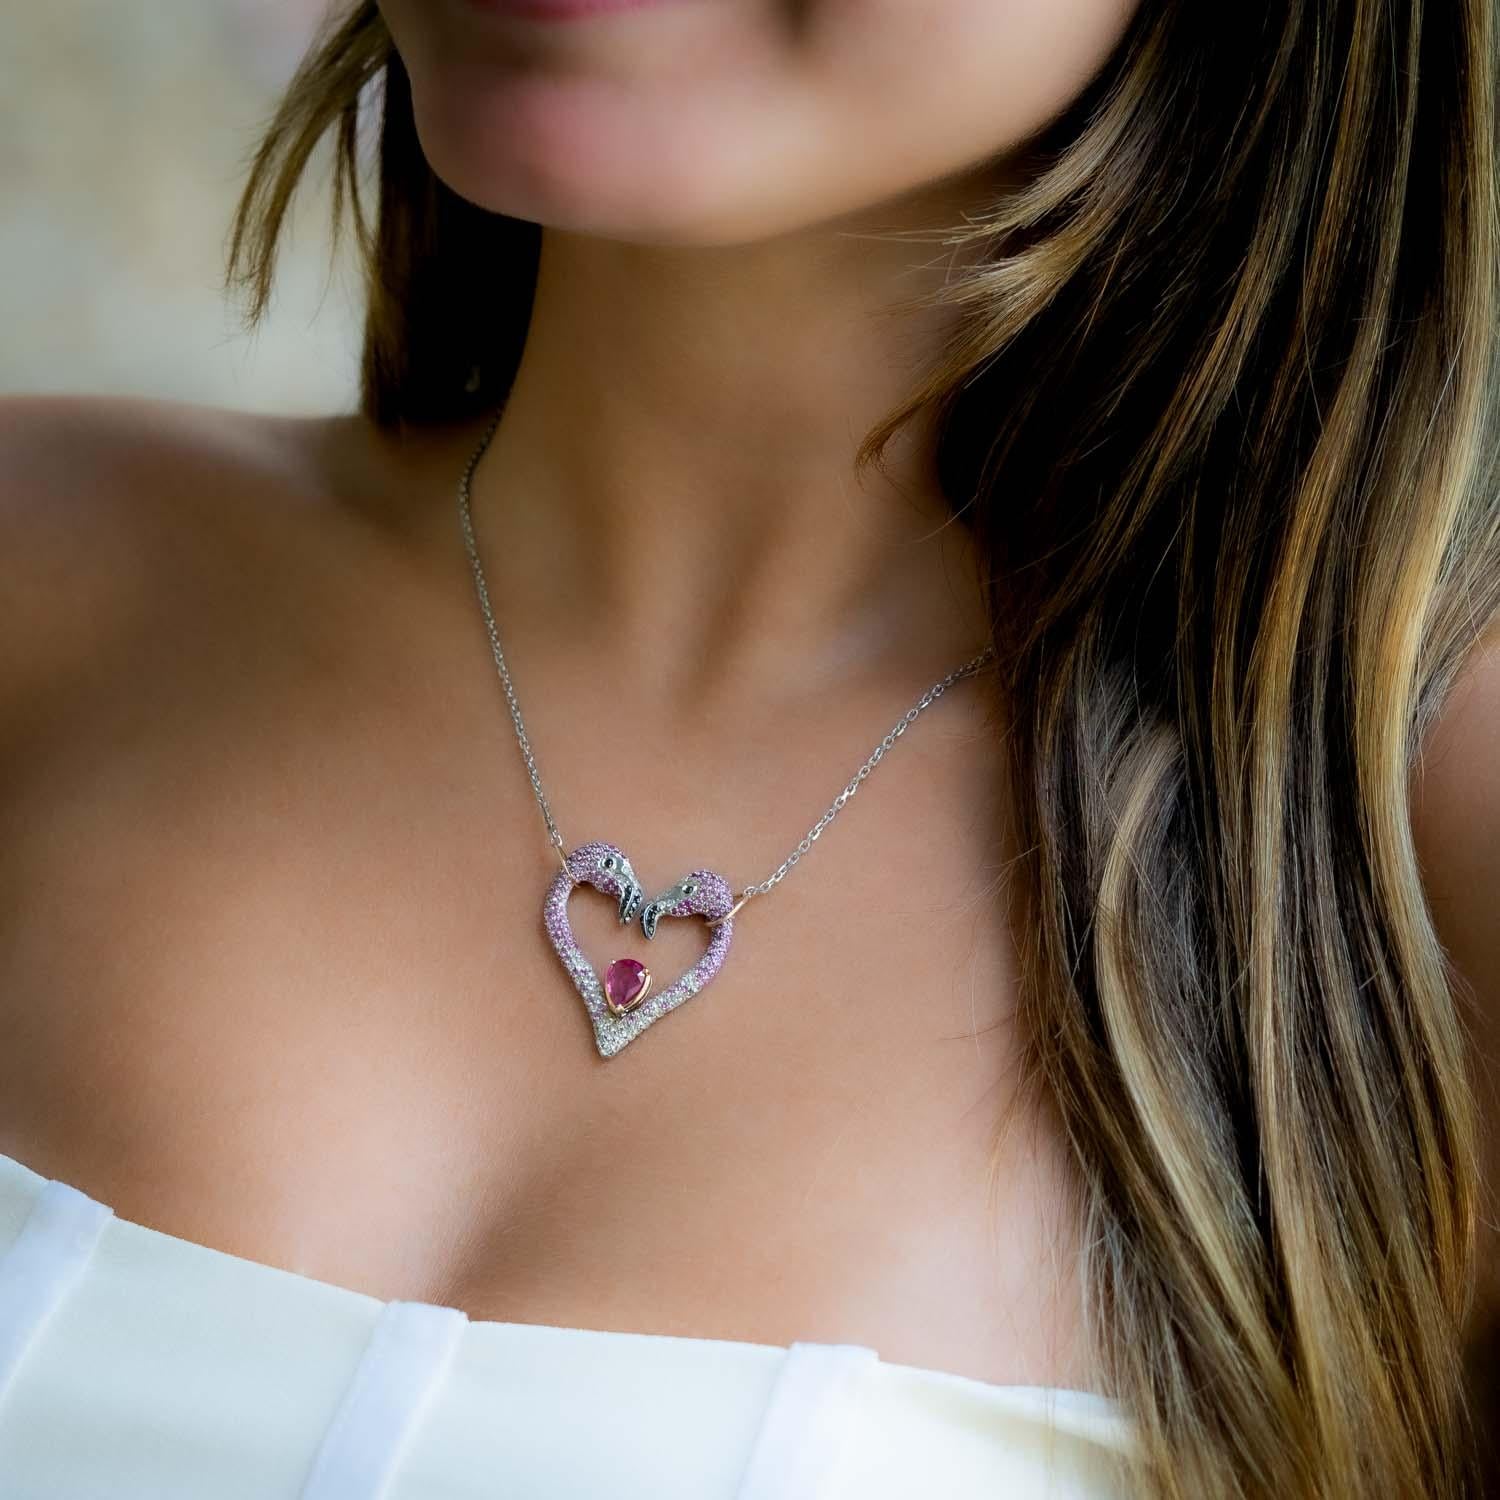 This gorgeous 18 carat rose gold and sterling silver Flamingo Heart Necklace is a unique piece of jewelry. The design features two flamingos forming a heart shape, encrusted with pink and white sapphires. The center stone, a ruby framed in 18K rose